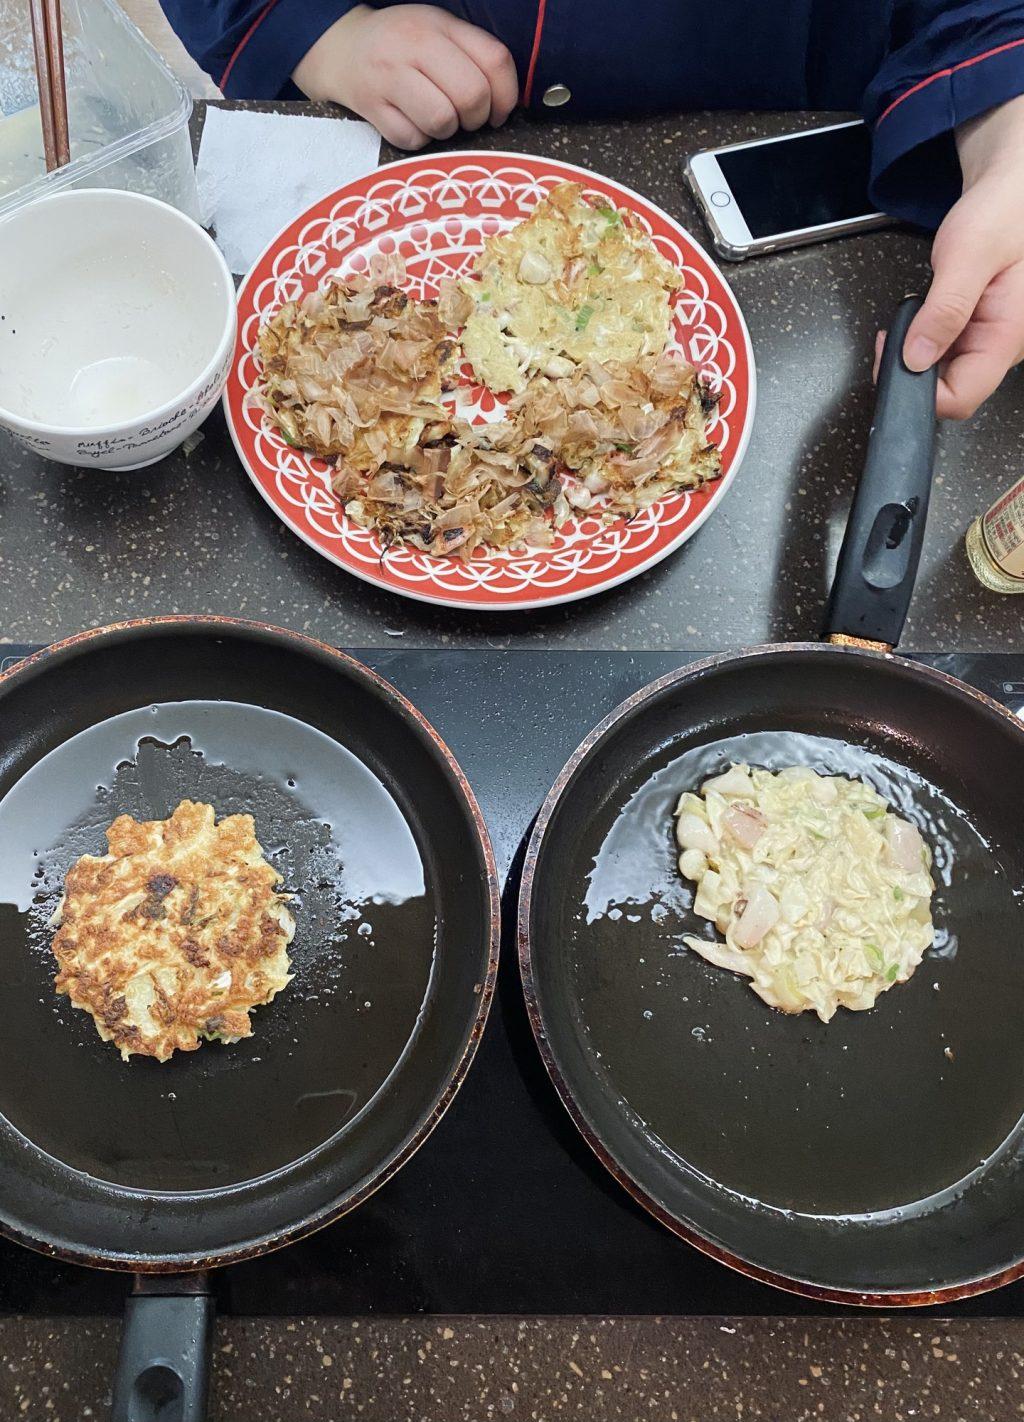 Grace Lee, a senior Chemistry major at Sangmyung University, and I cook Okonomiyaki on a kitchen stove Sept. 19. This was the second time I cooked with another housemate, and it was the beginning of a new friendship.